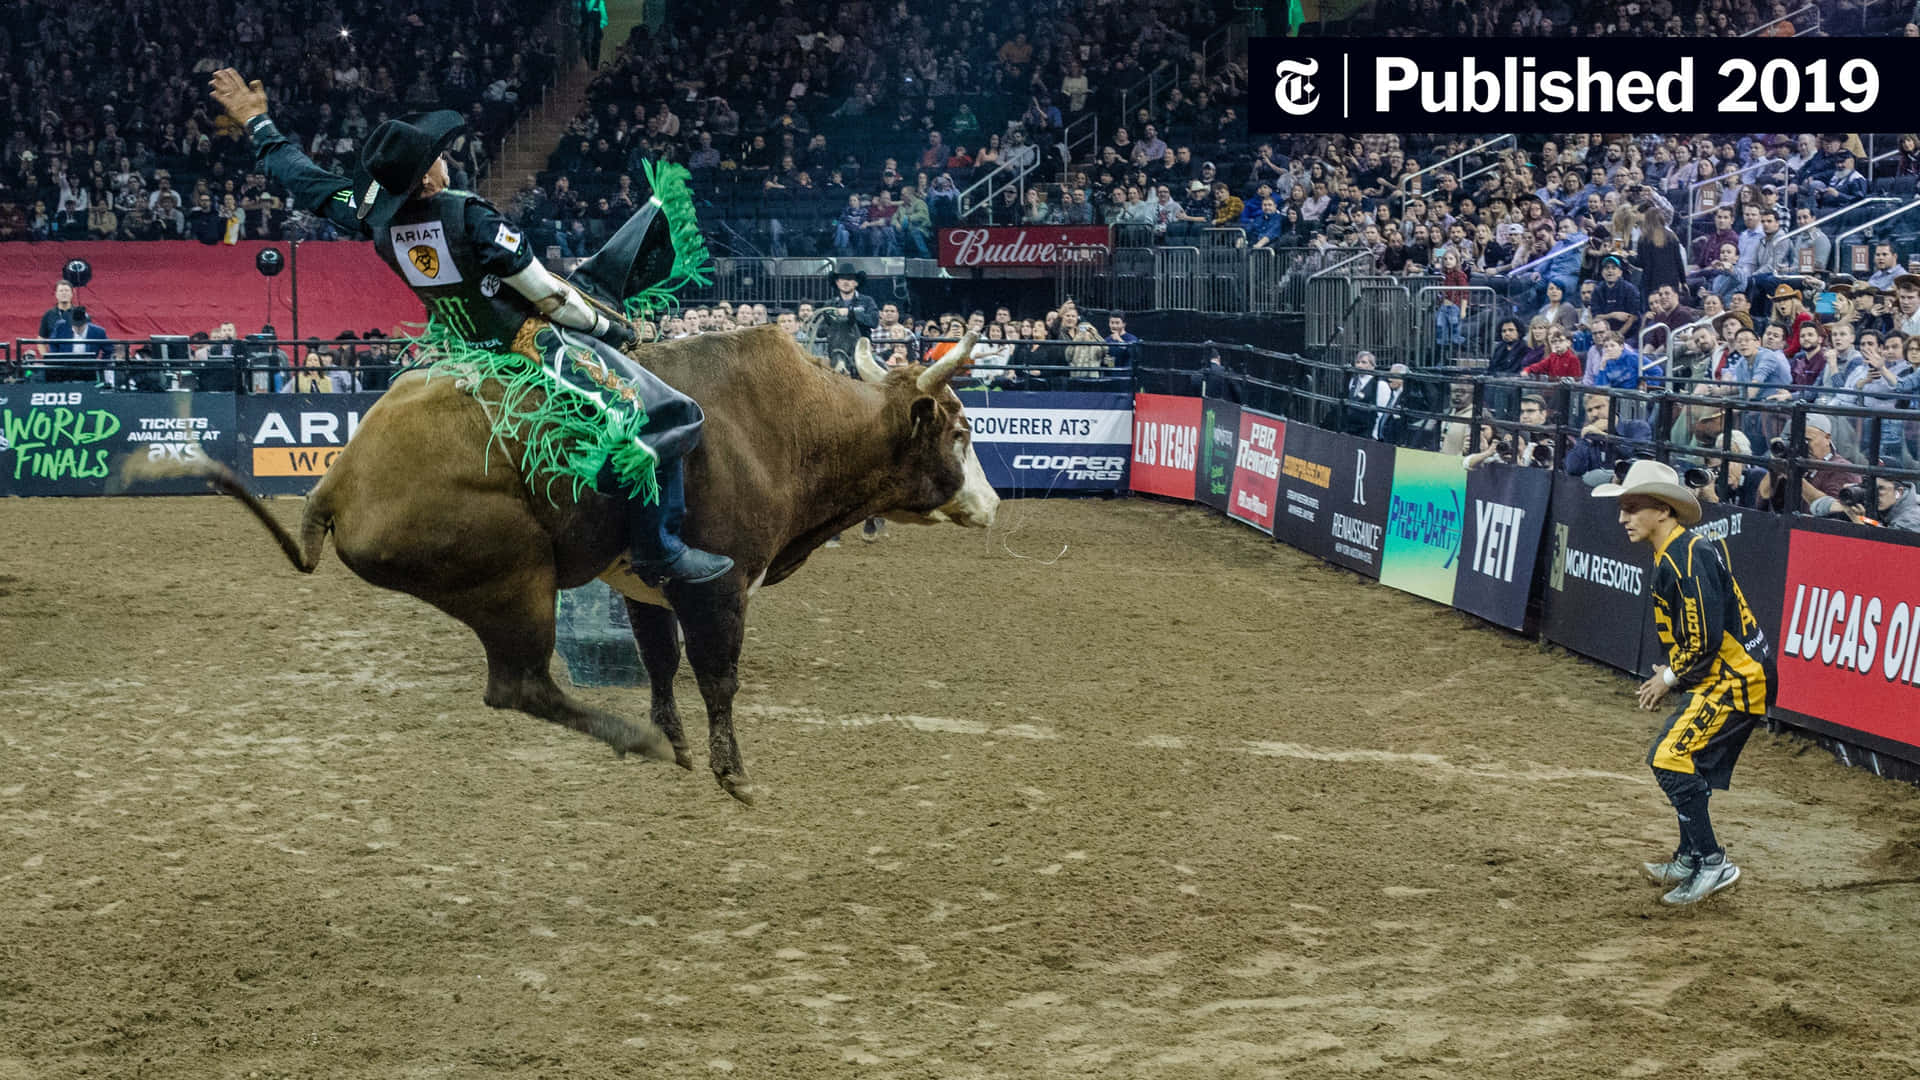 Cowboys challenge the dangers of bull riding.